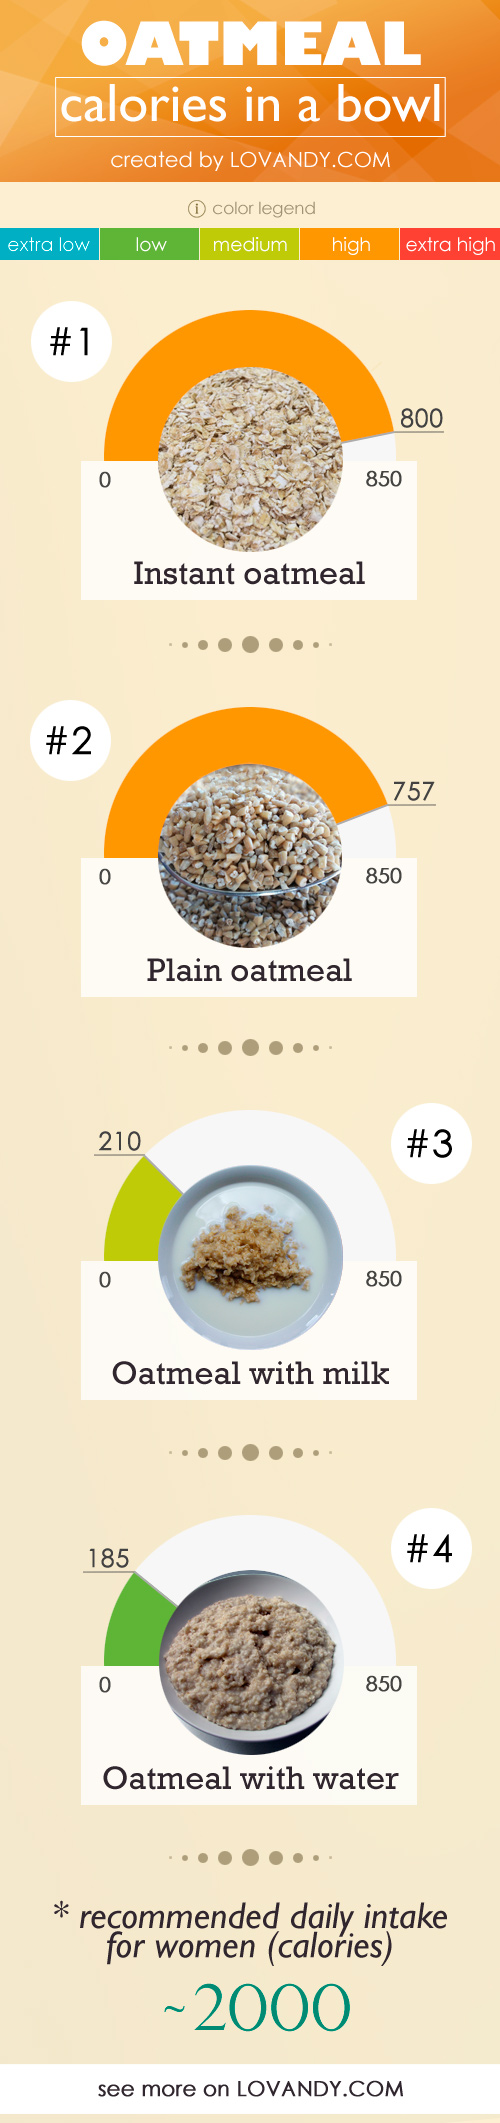 calories in oatmeal with milk